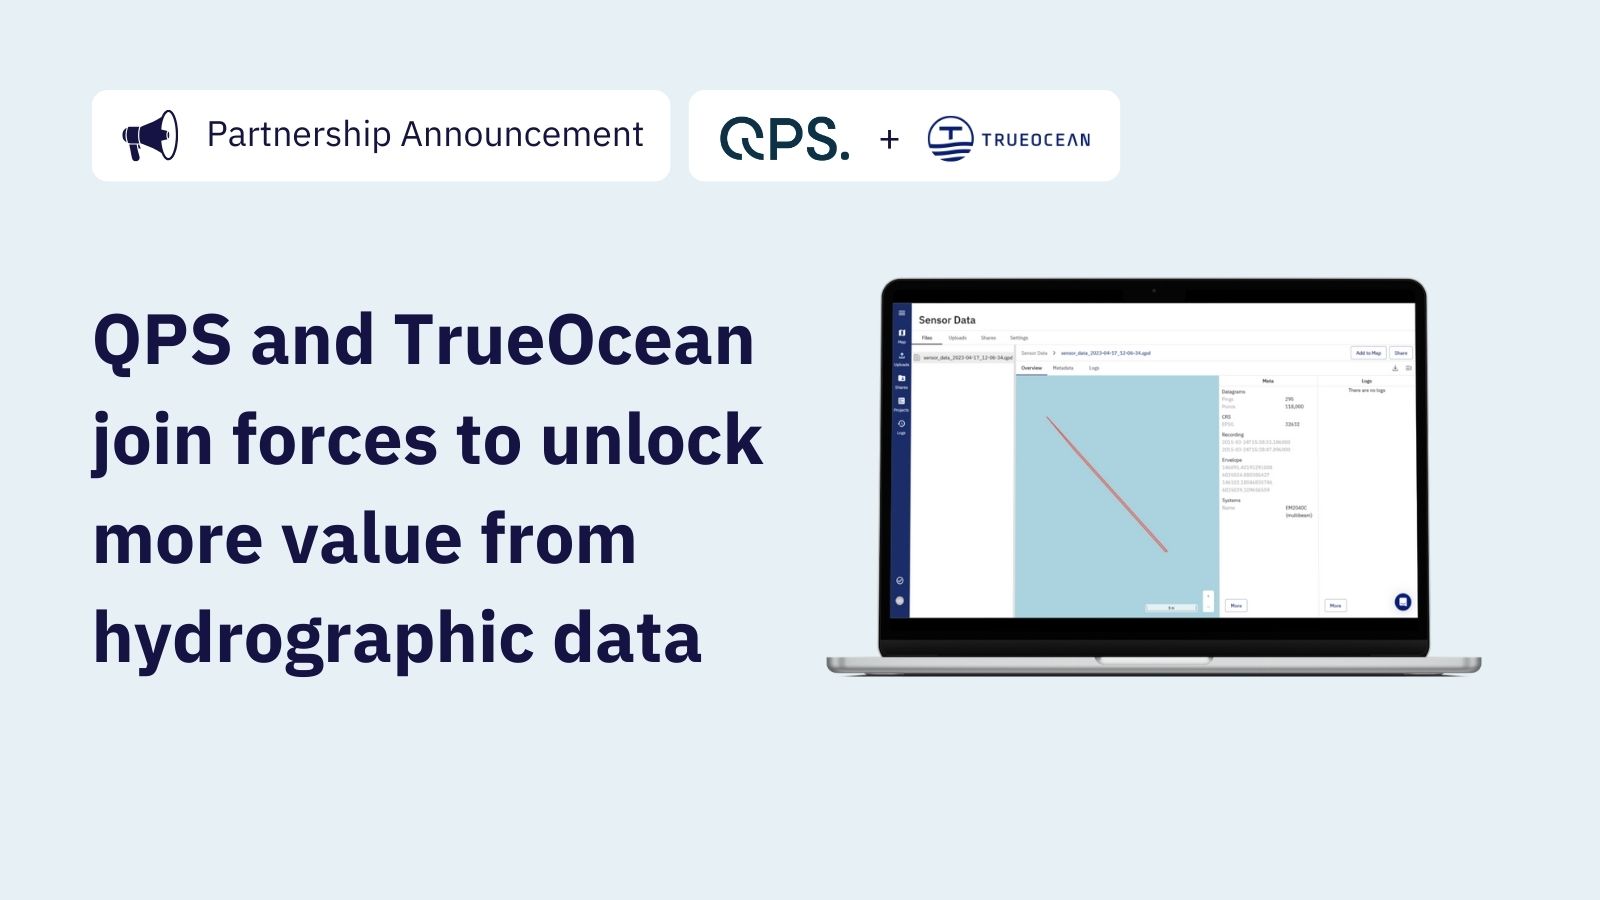 QPS and TrueOcean Join Forces to Unlock Value from Hydrographic Data